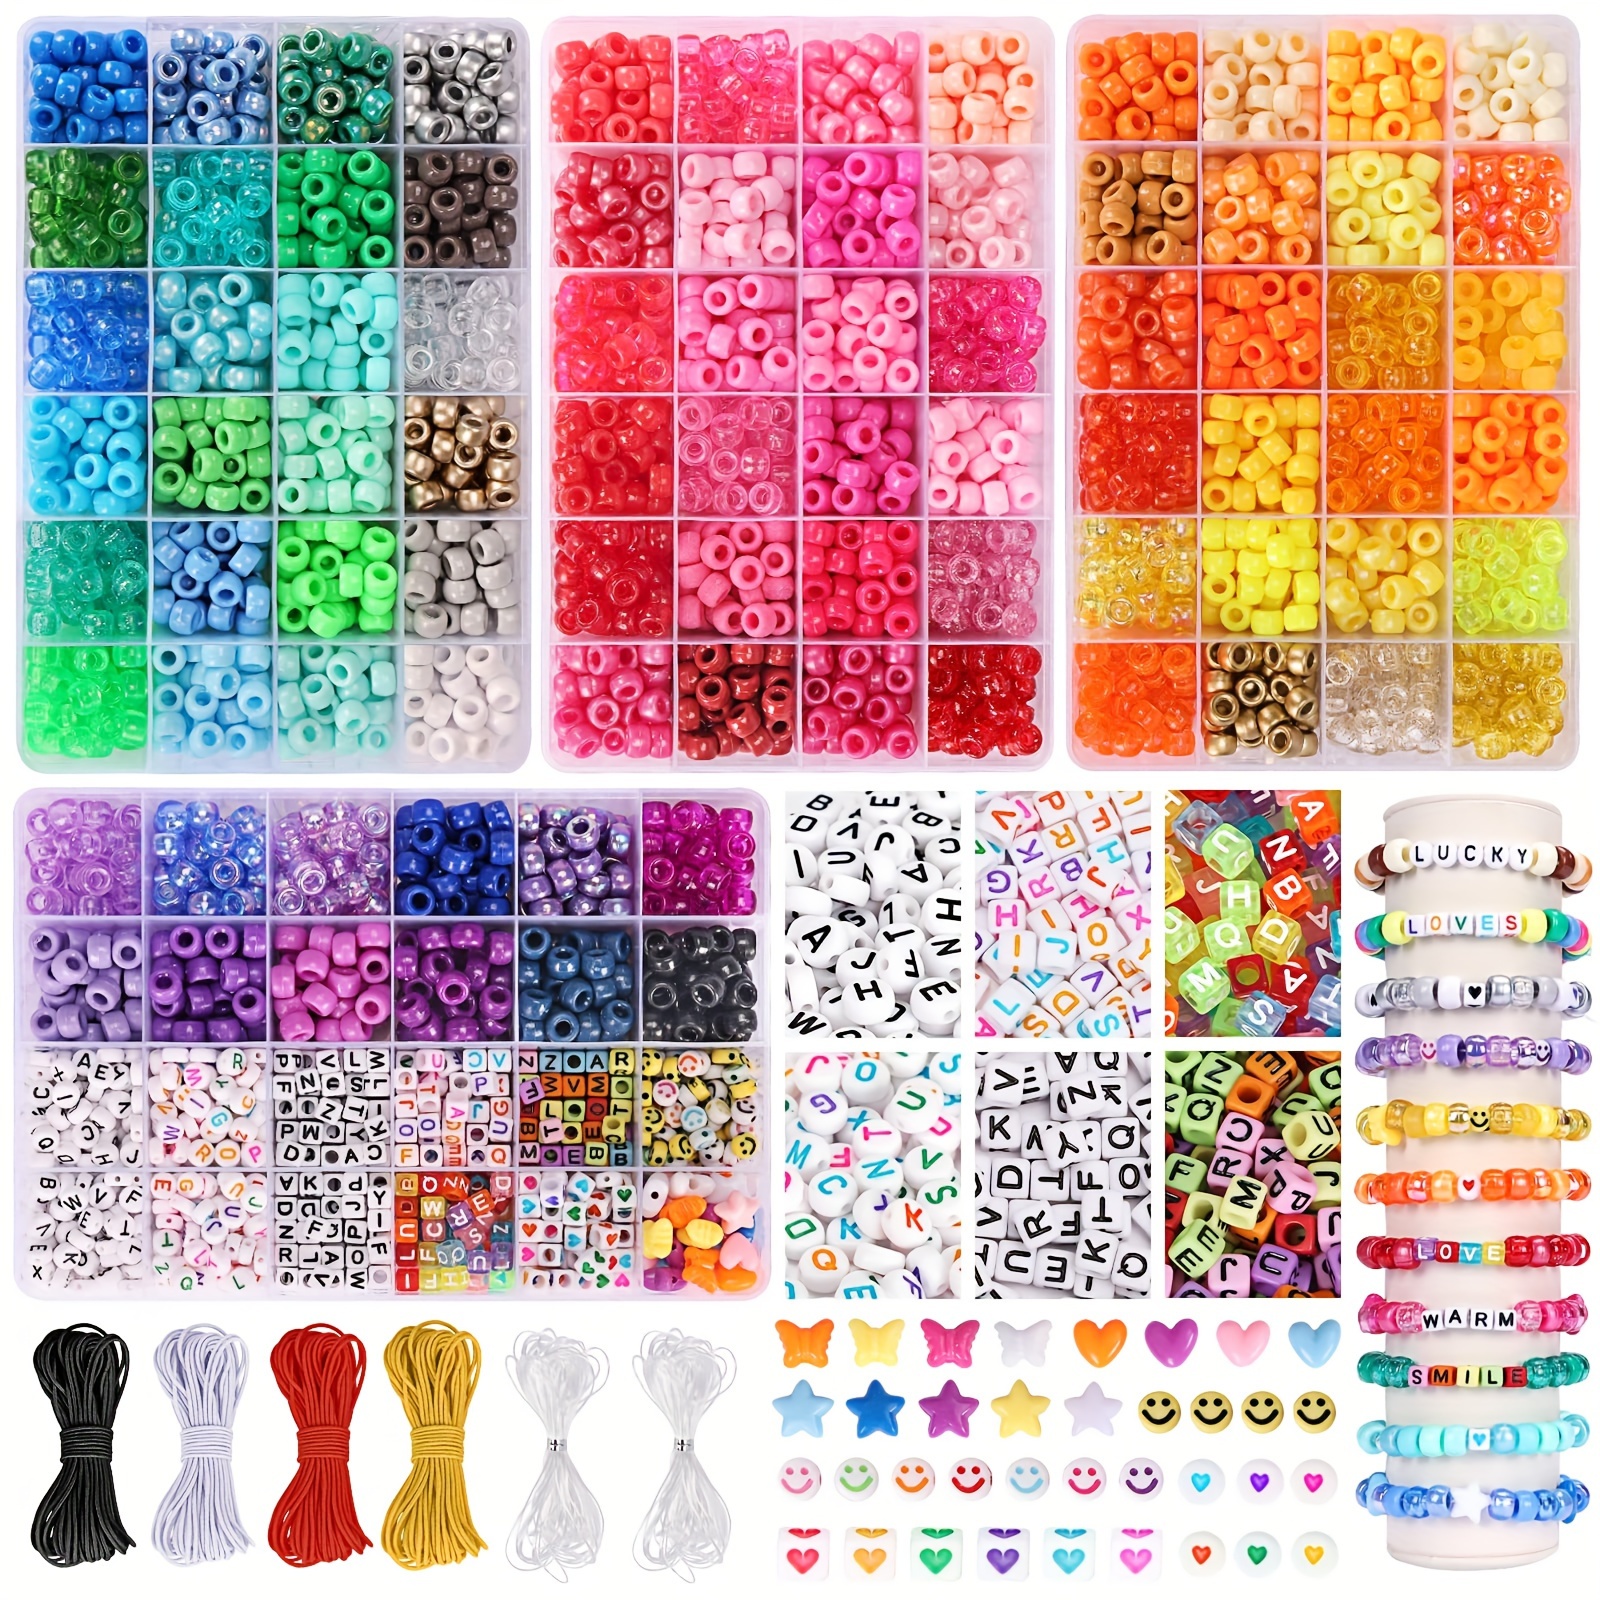 600pcs Necklace Bracelet Making Kit, Friendship Kandi Pony Beads, Hair  Beads With Heart Letter Beads For Jewelry Making DIY Crafts Gift Box